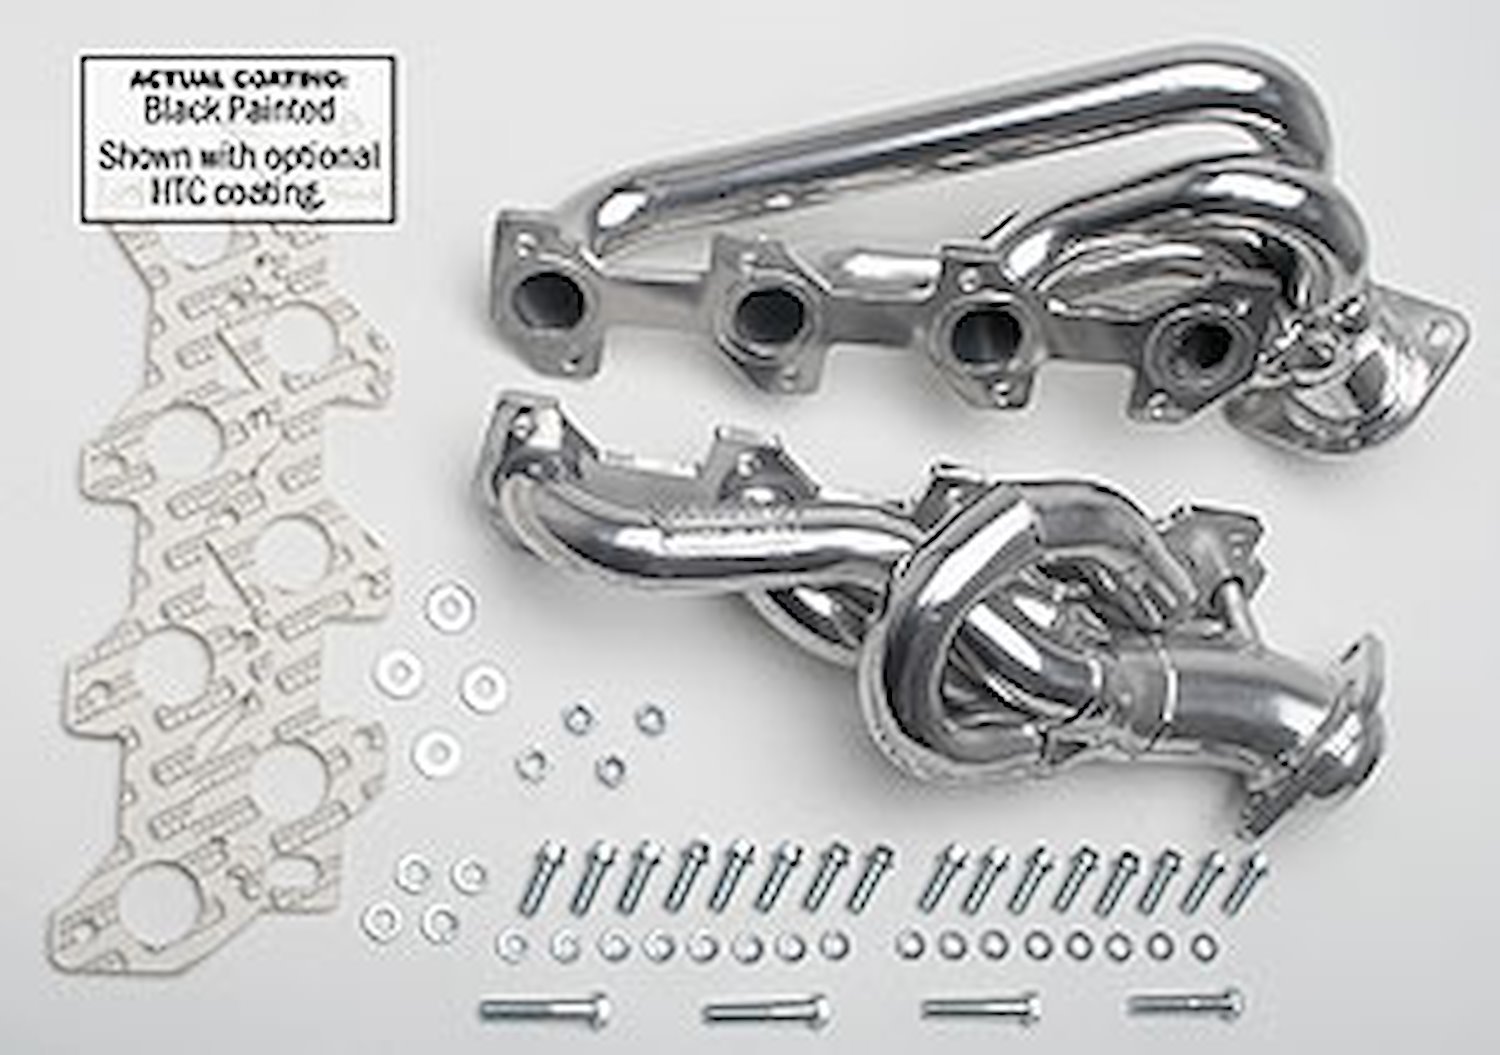 Standard Duty Uncoated Shorty Headers 2000-07 Dodge